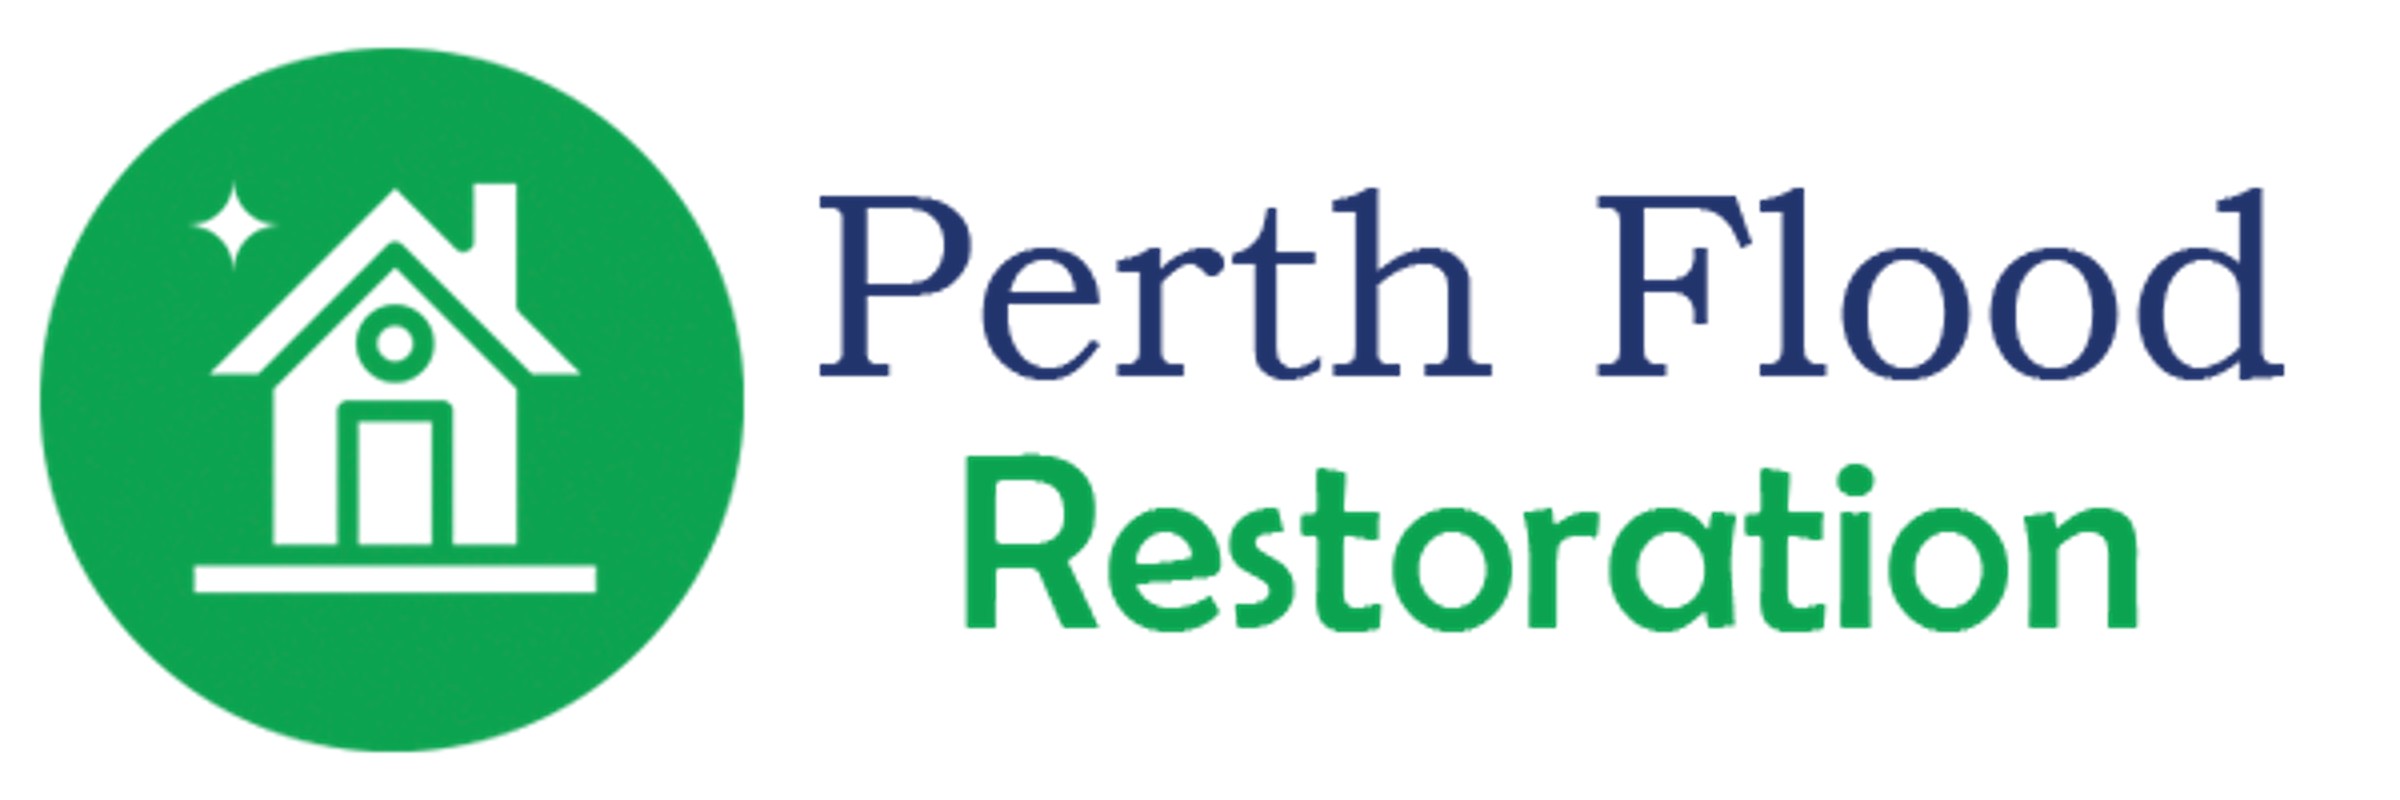 Perth Flood Restoration Launches Odor Removal Services for Flood Damage Jobs in Perth